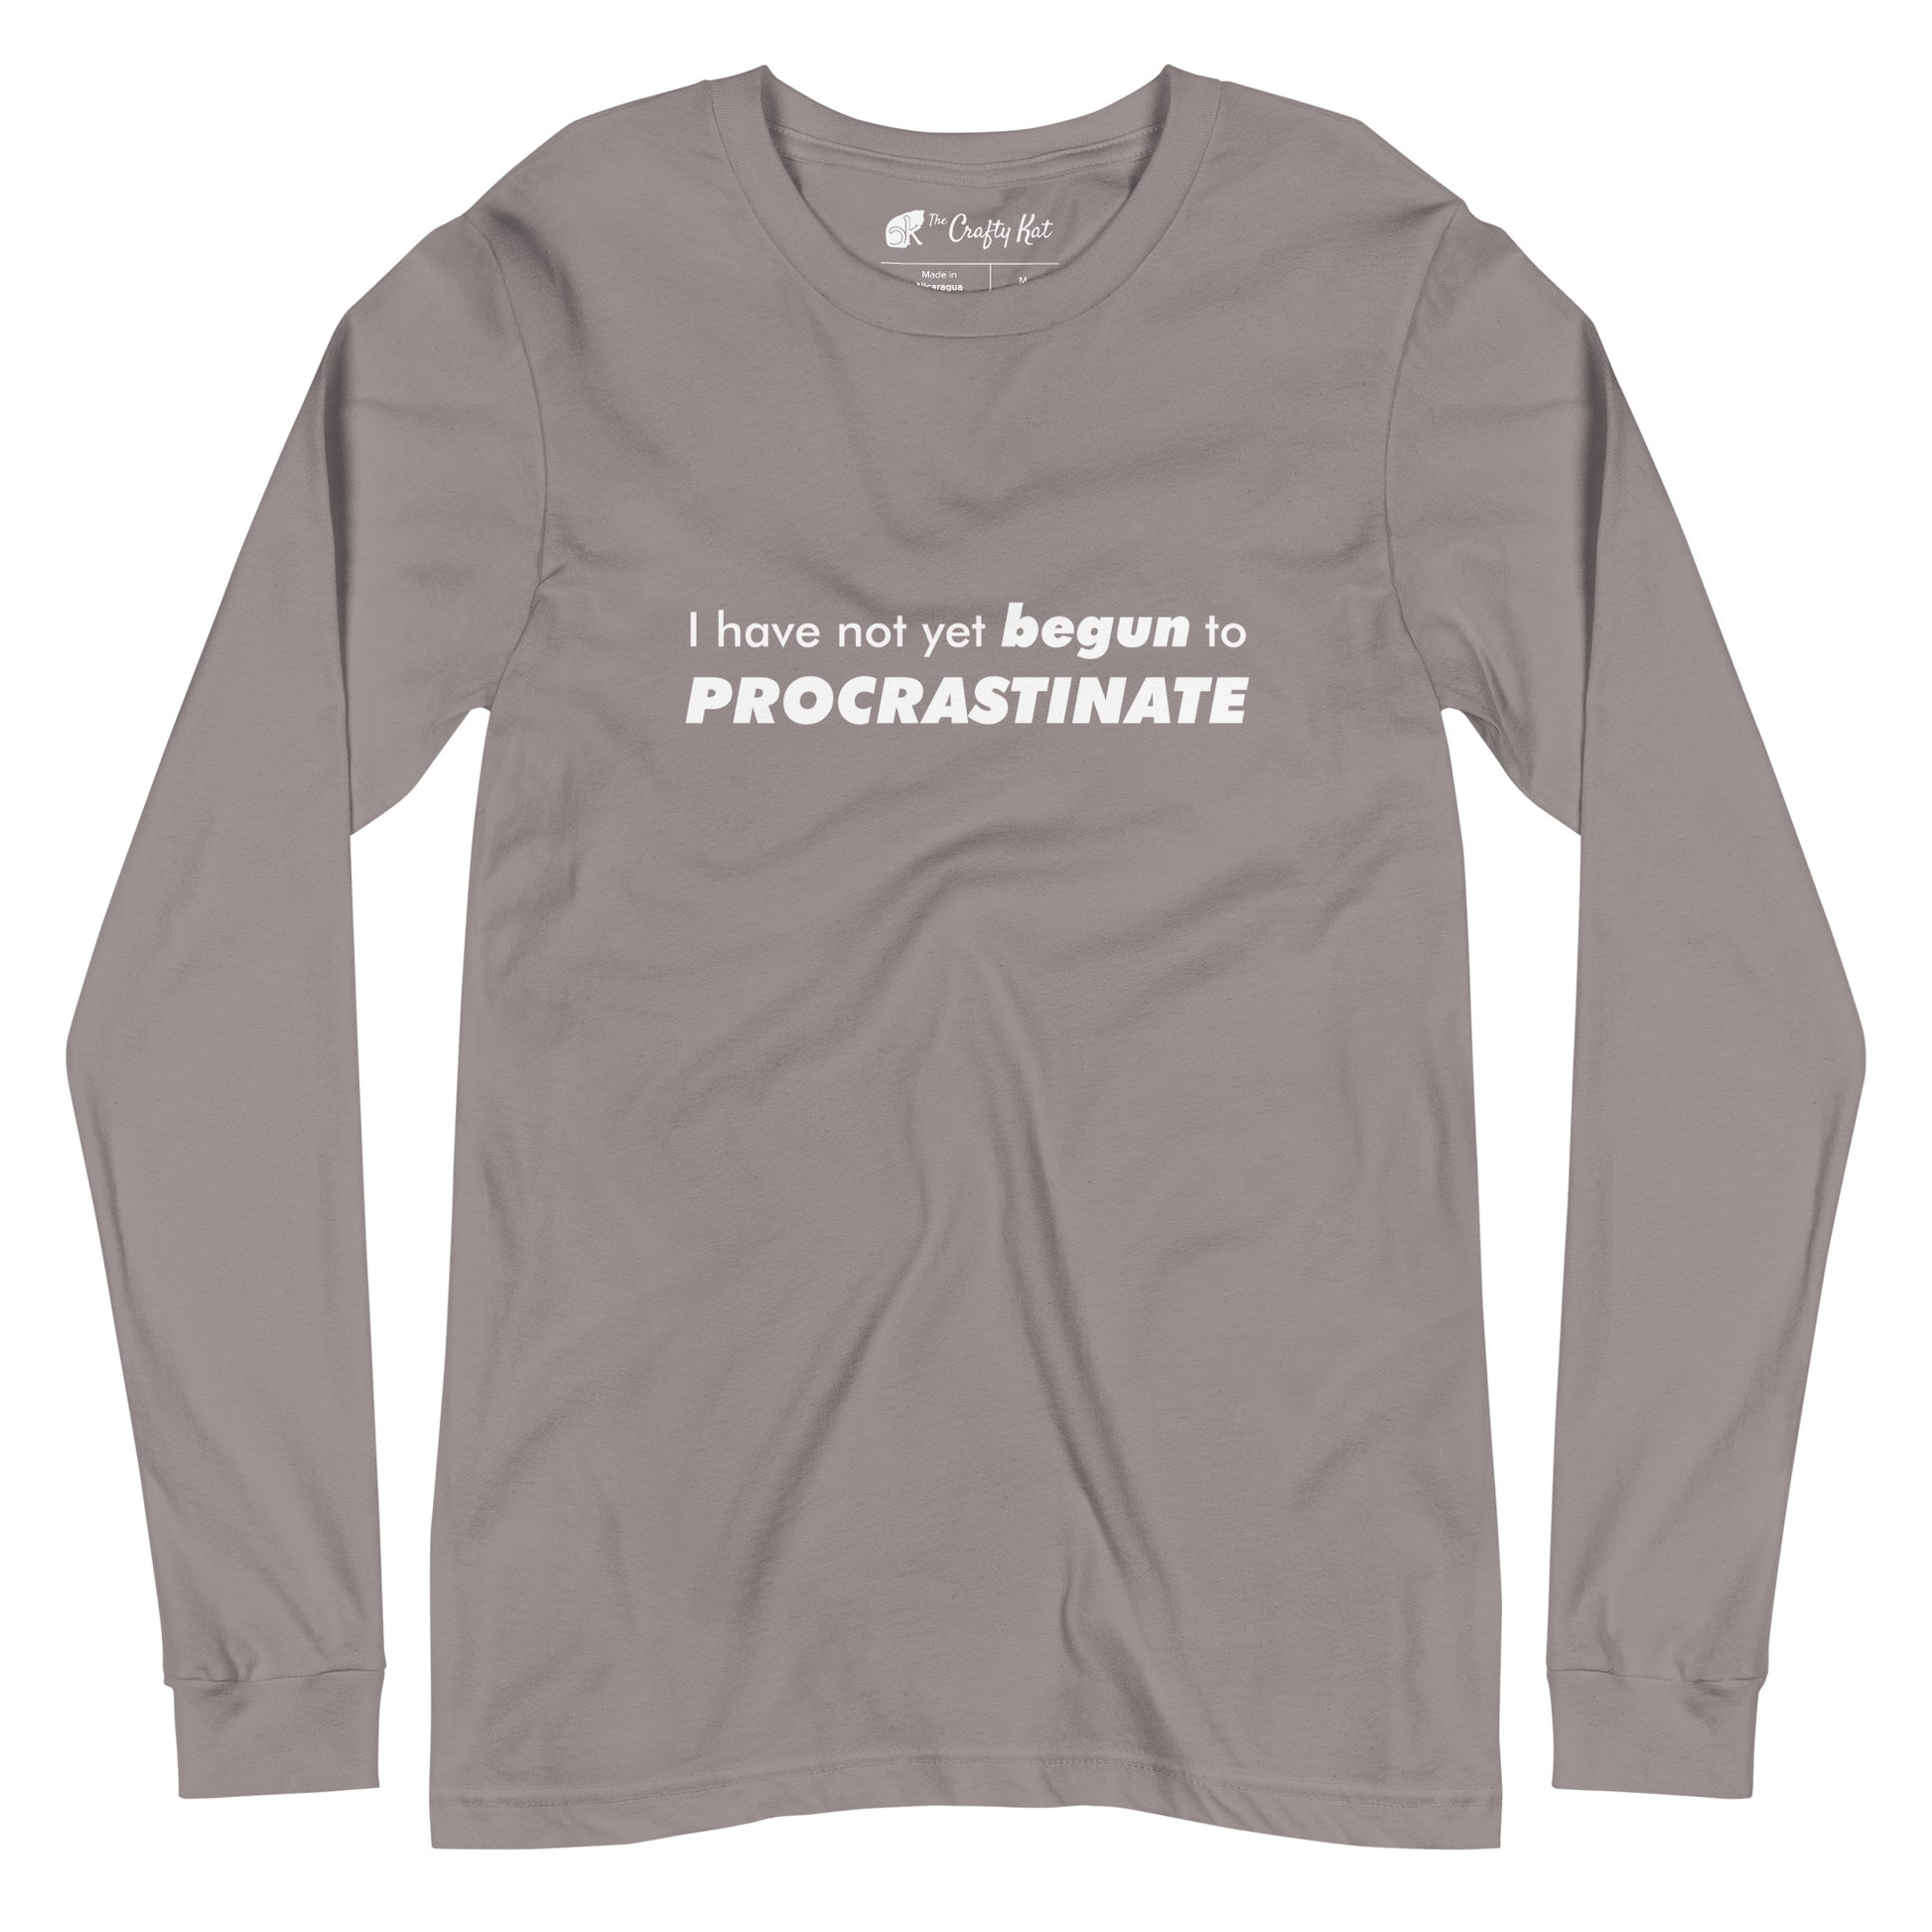 Storm (light grey) long-sleeve shirt with text graphic: "I have not yet BEGUN to PROCRASTINATE"